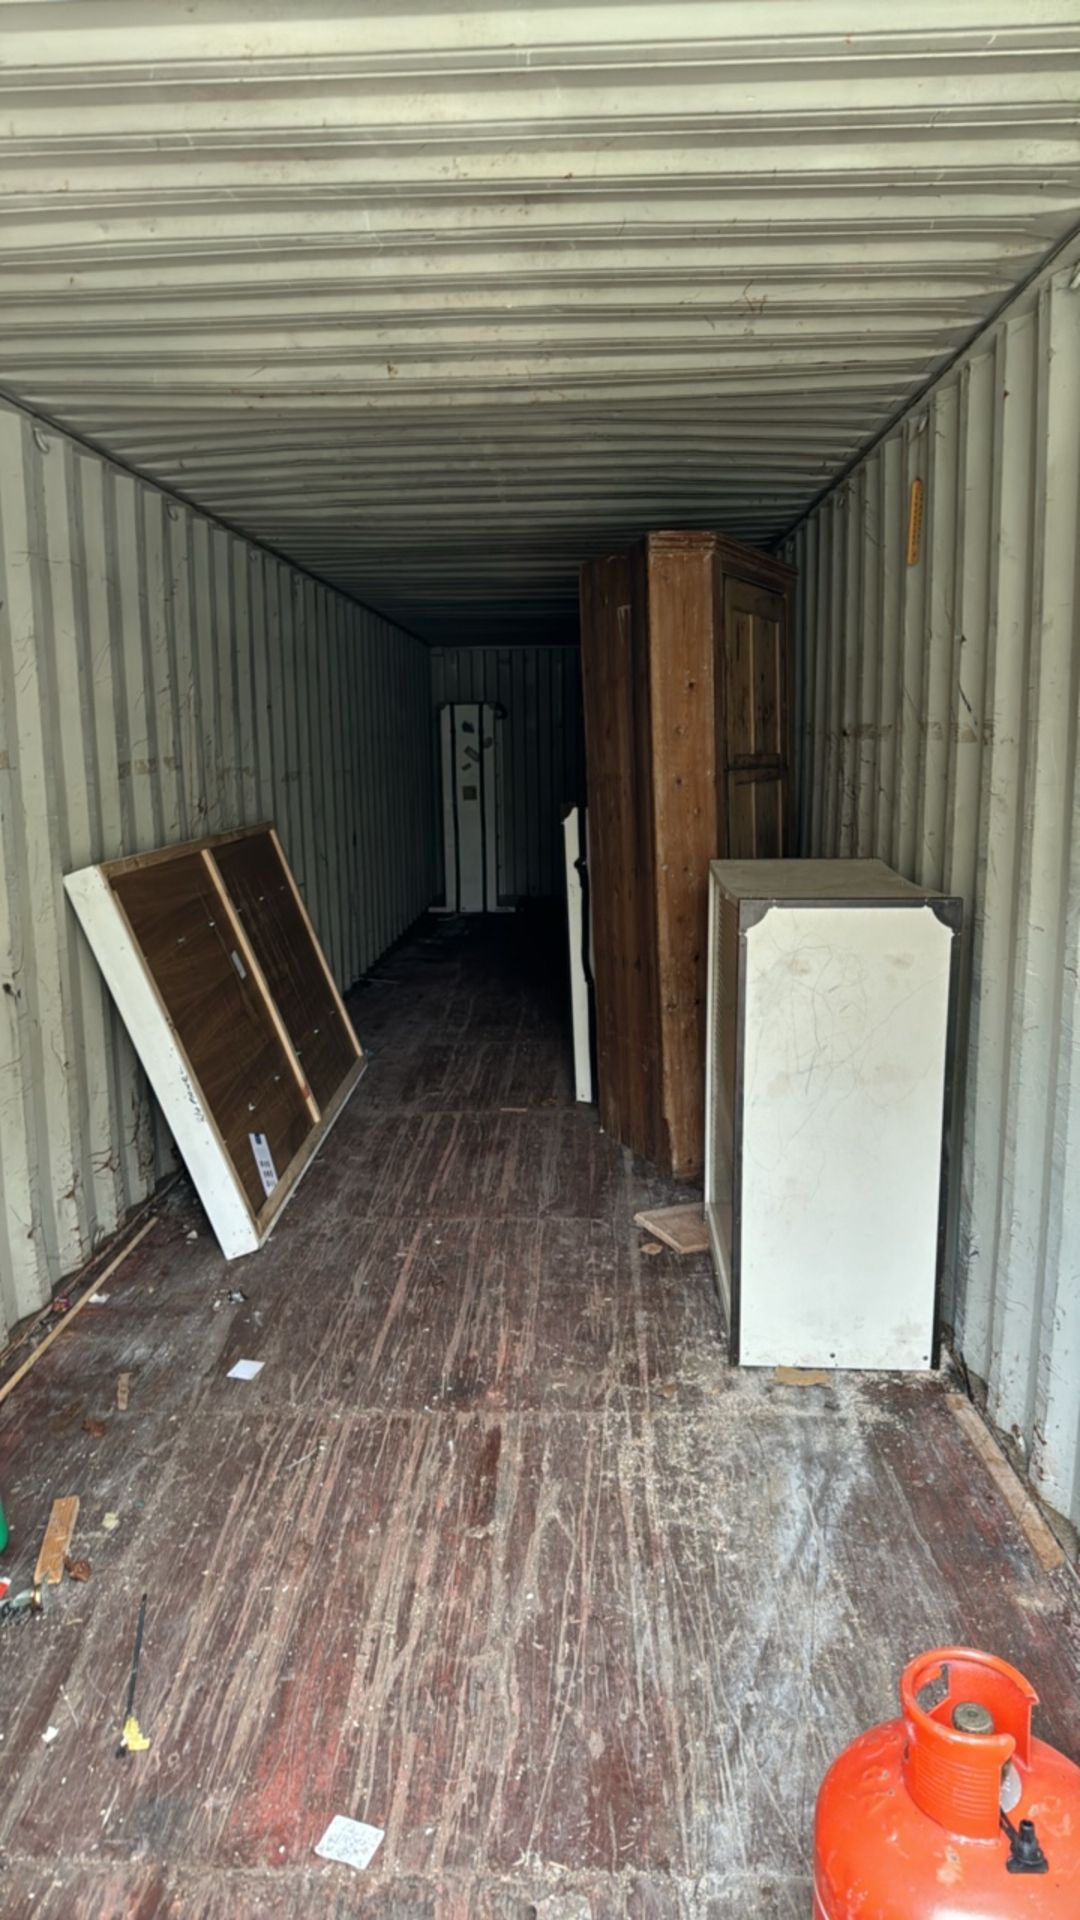 Export Type Shipping Container - Image 2 of 5